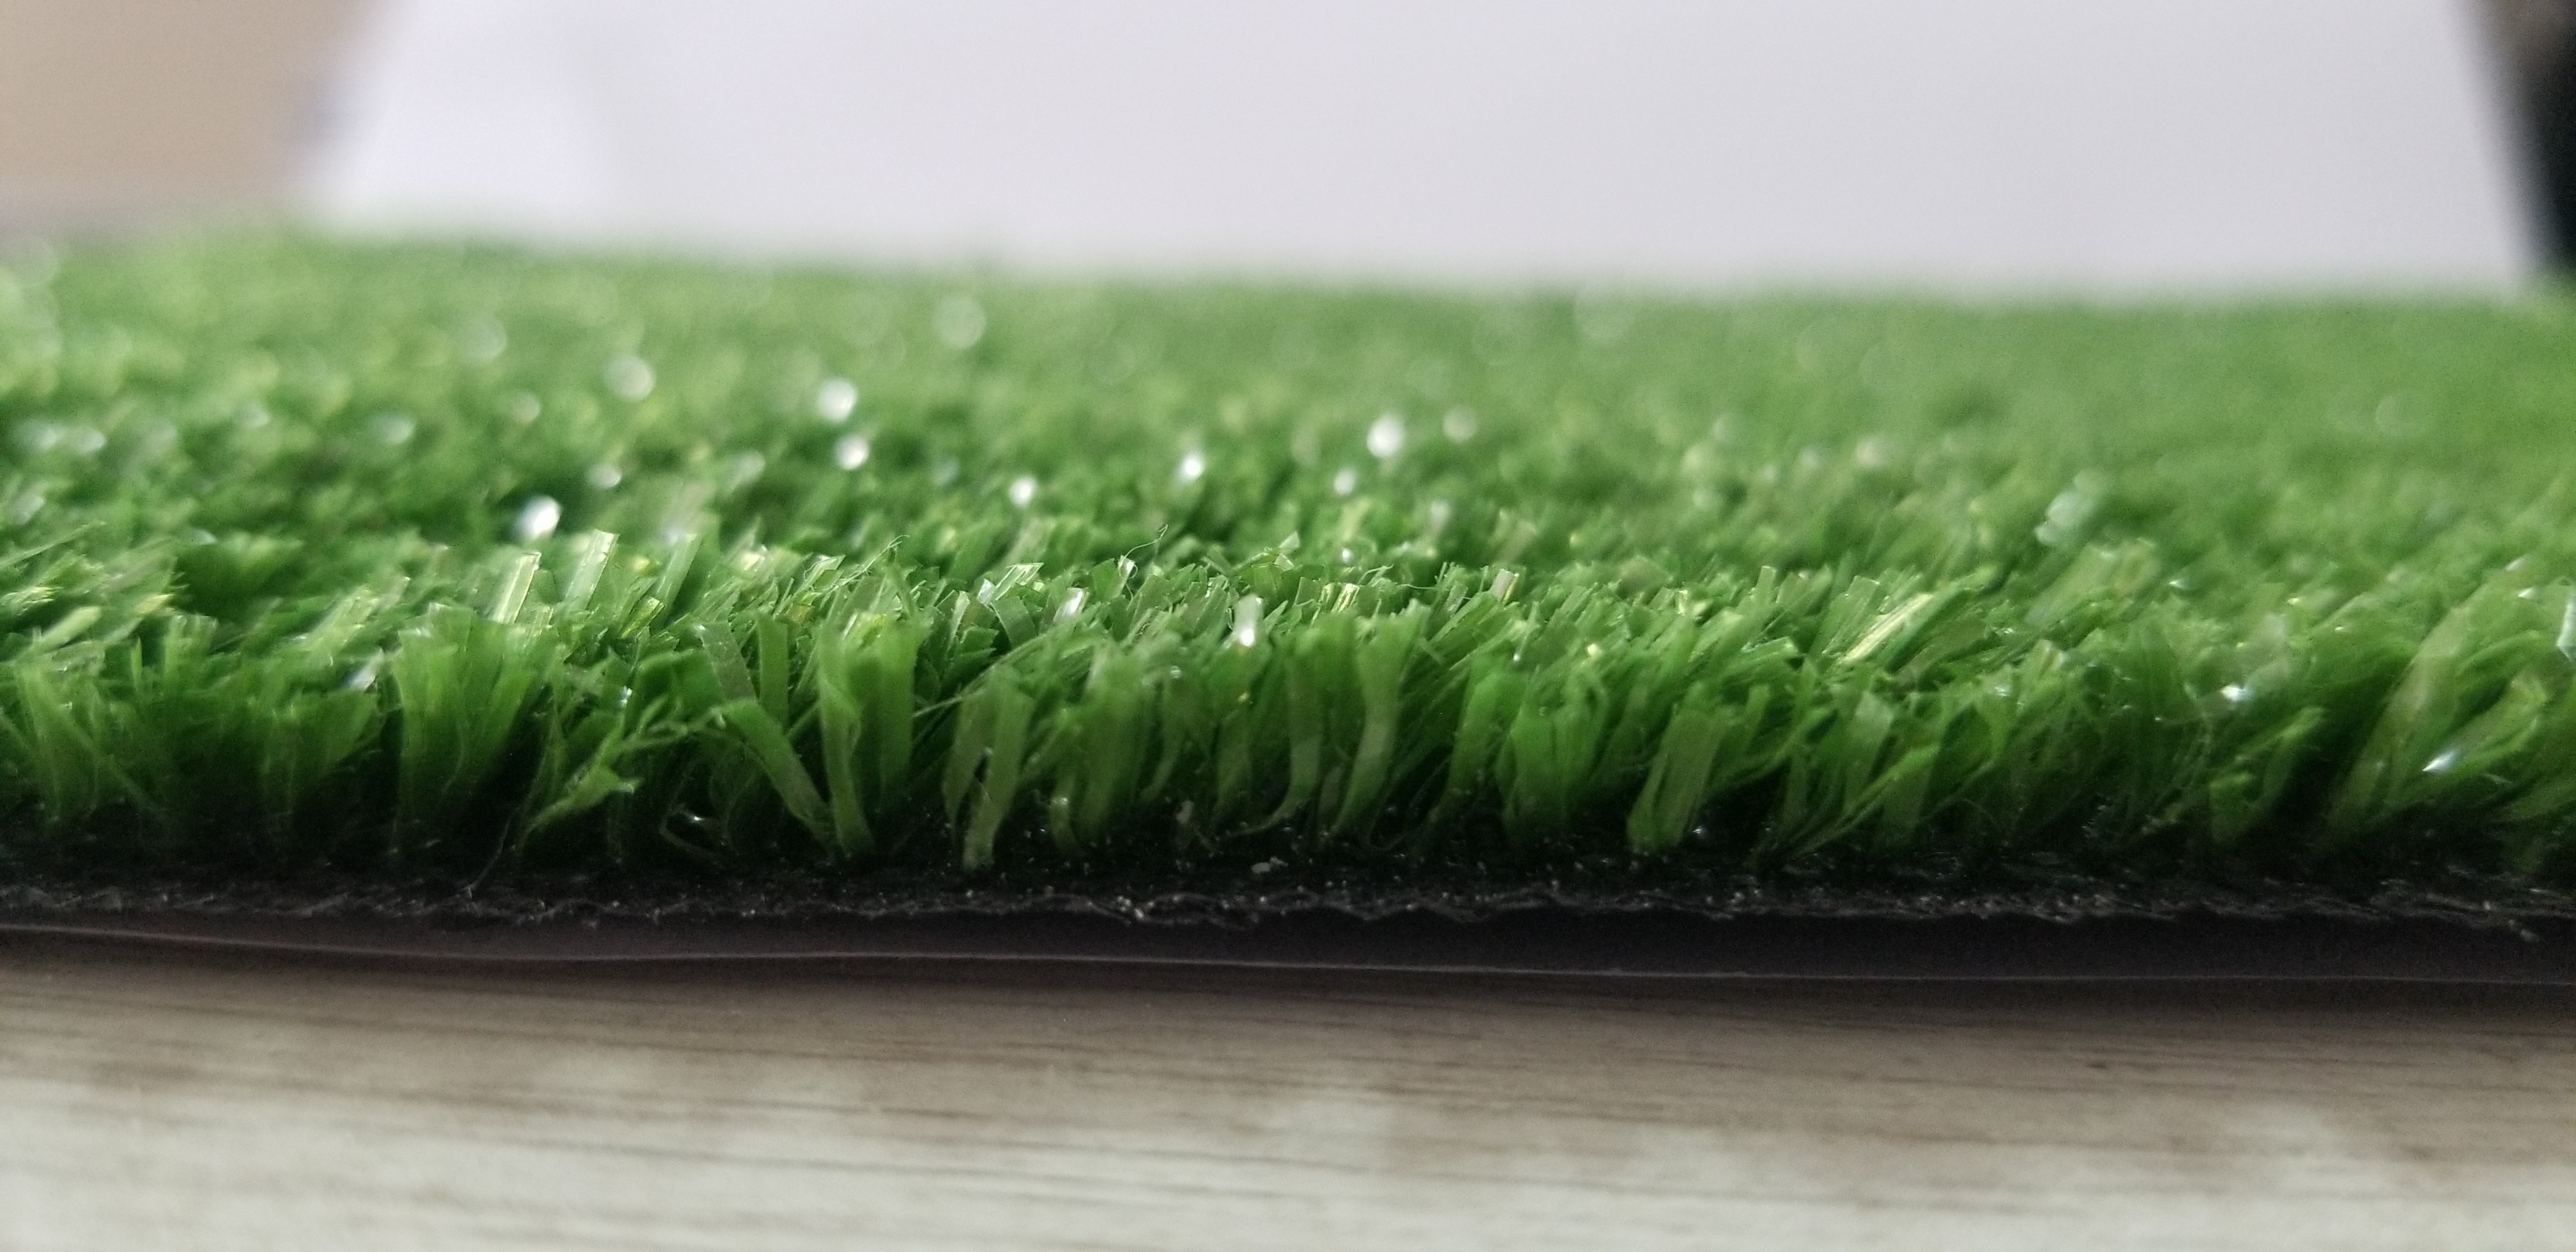 Artificial lawn for mini-footbal areas of children or pets